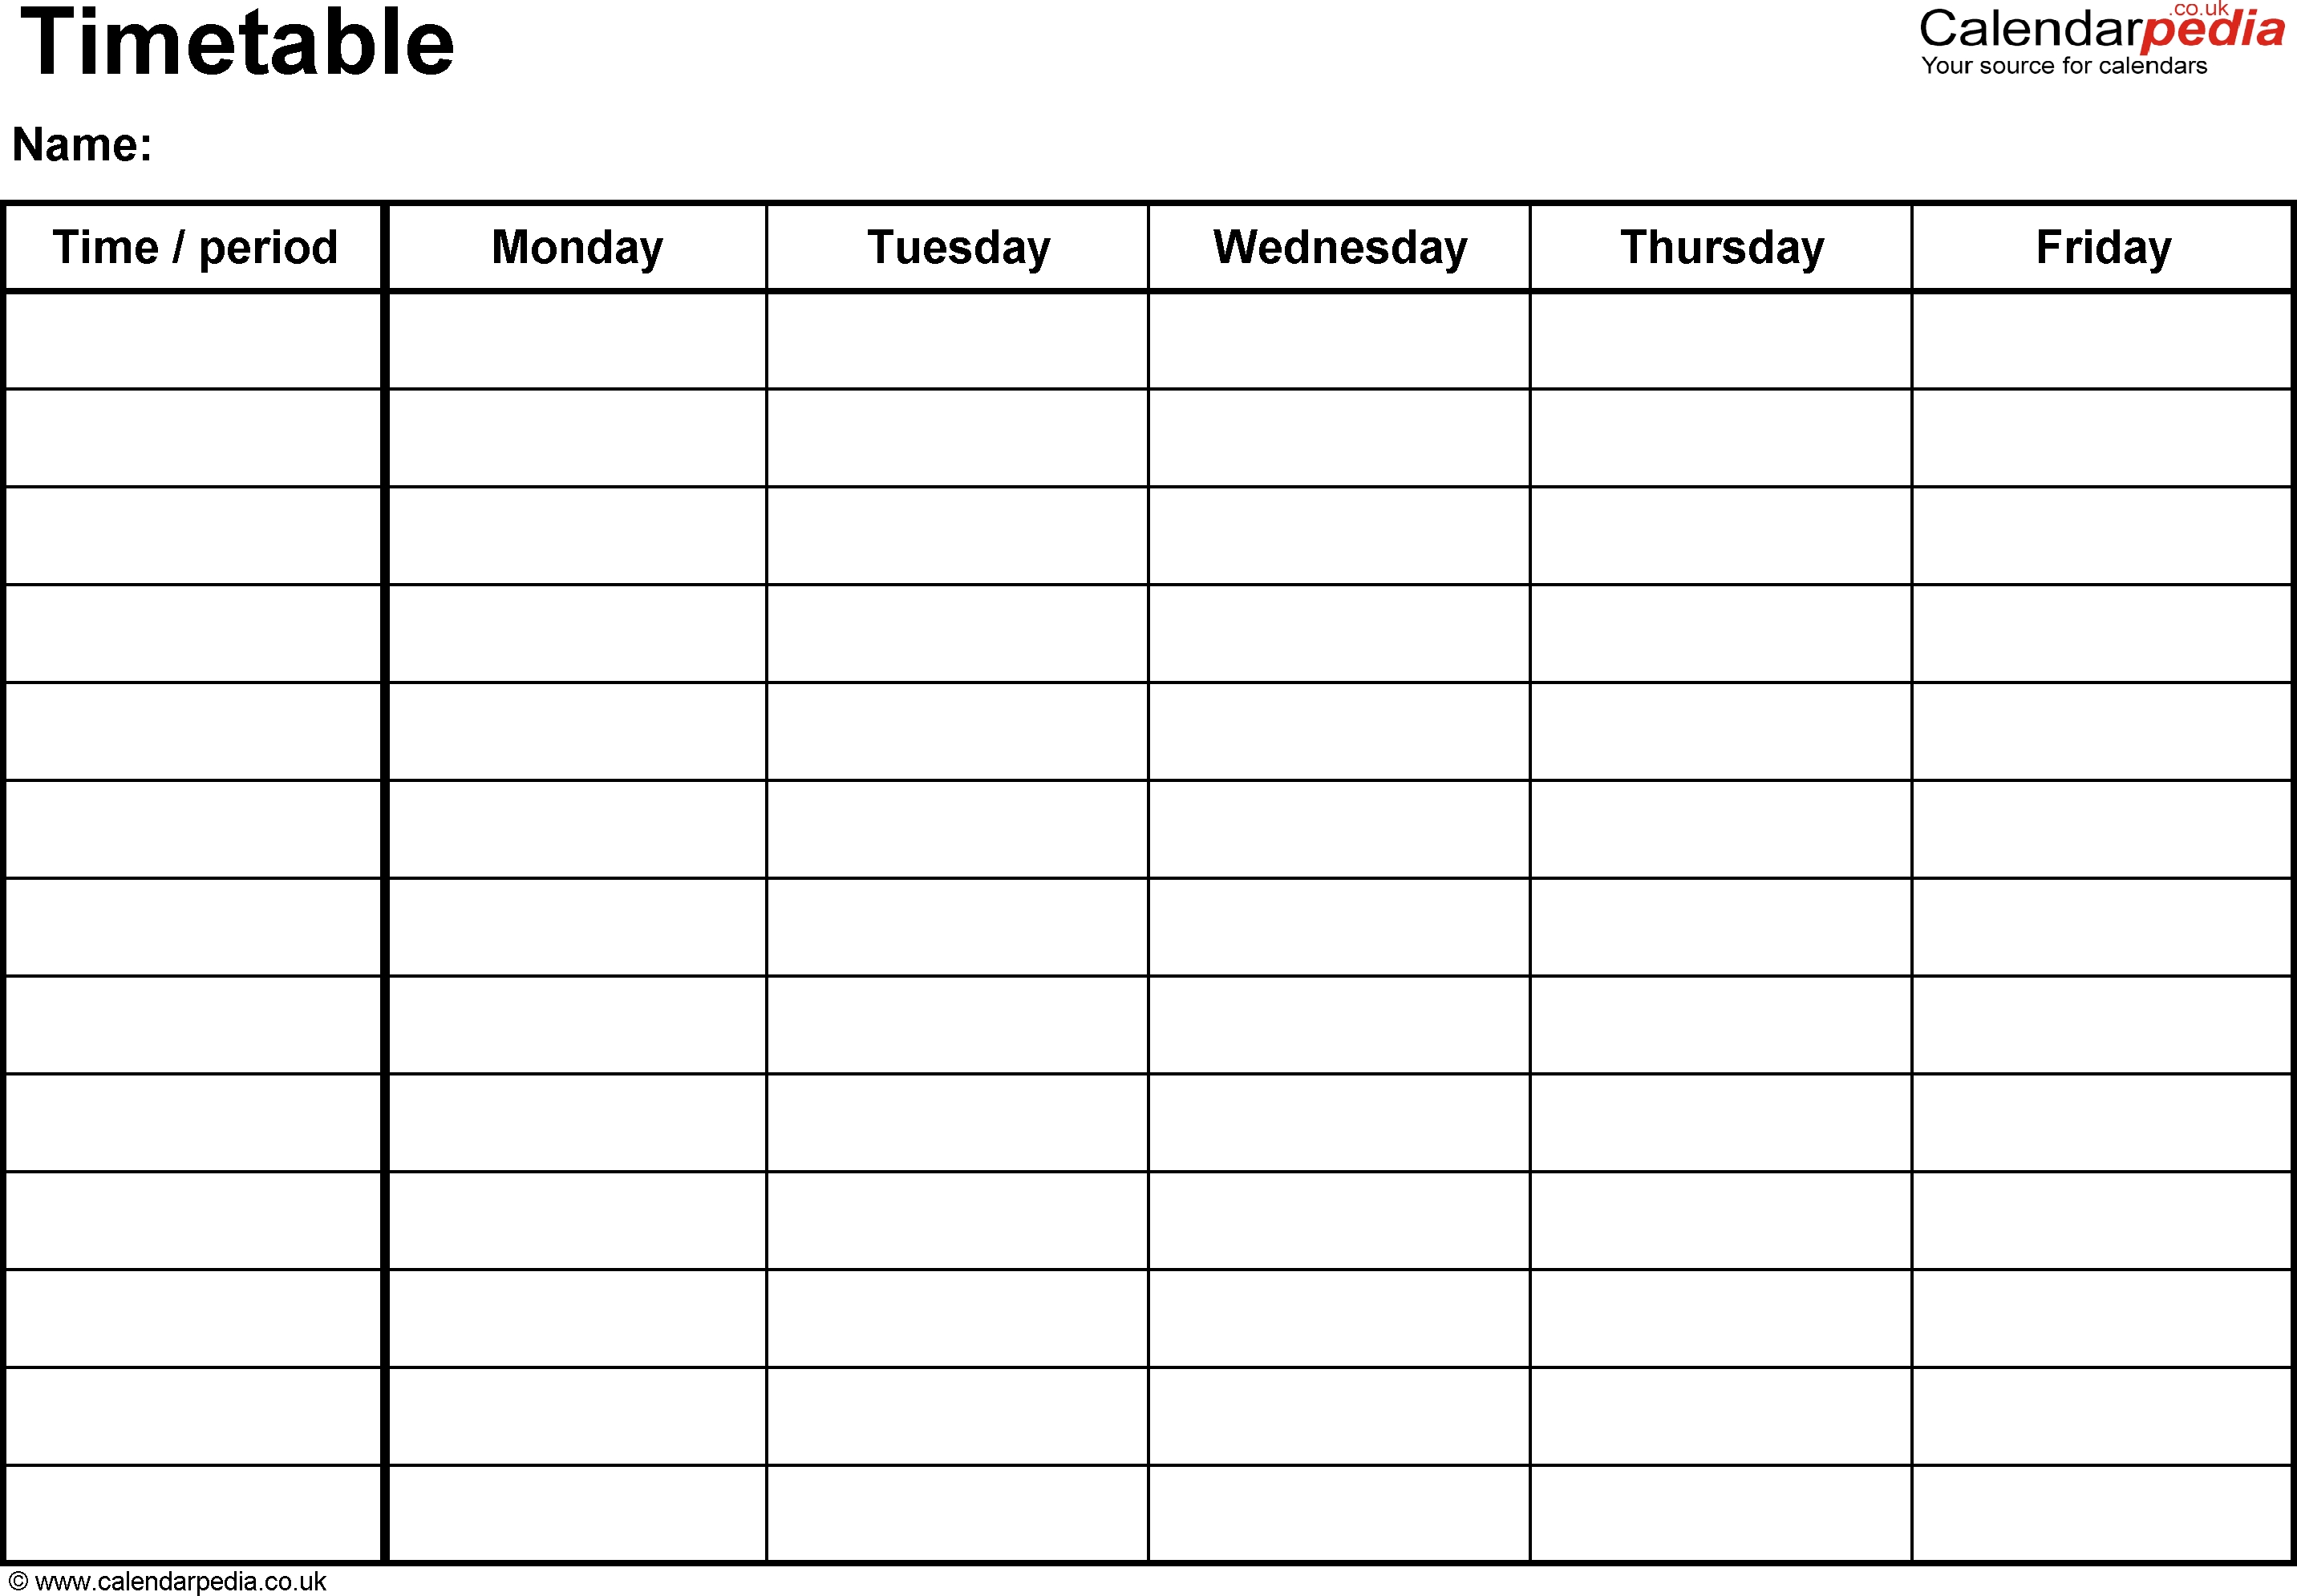 Timetables As Free Printable Templates For Microsoft Word  Weekly Schedule Monday Through Friday